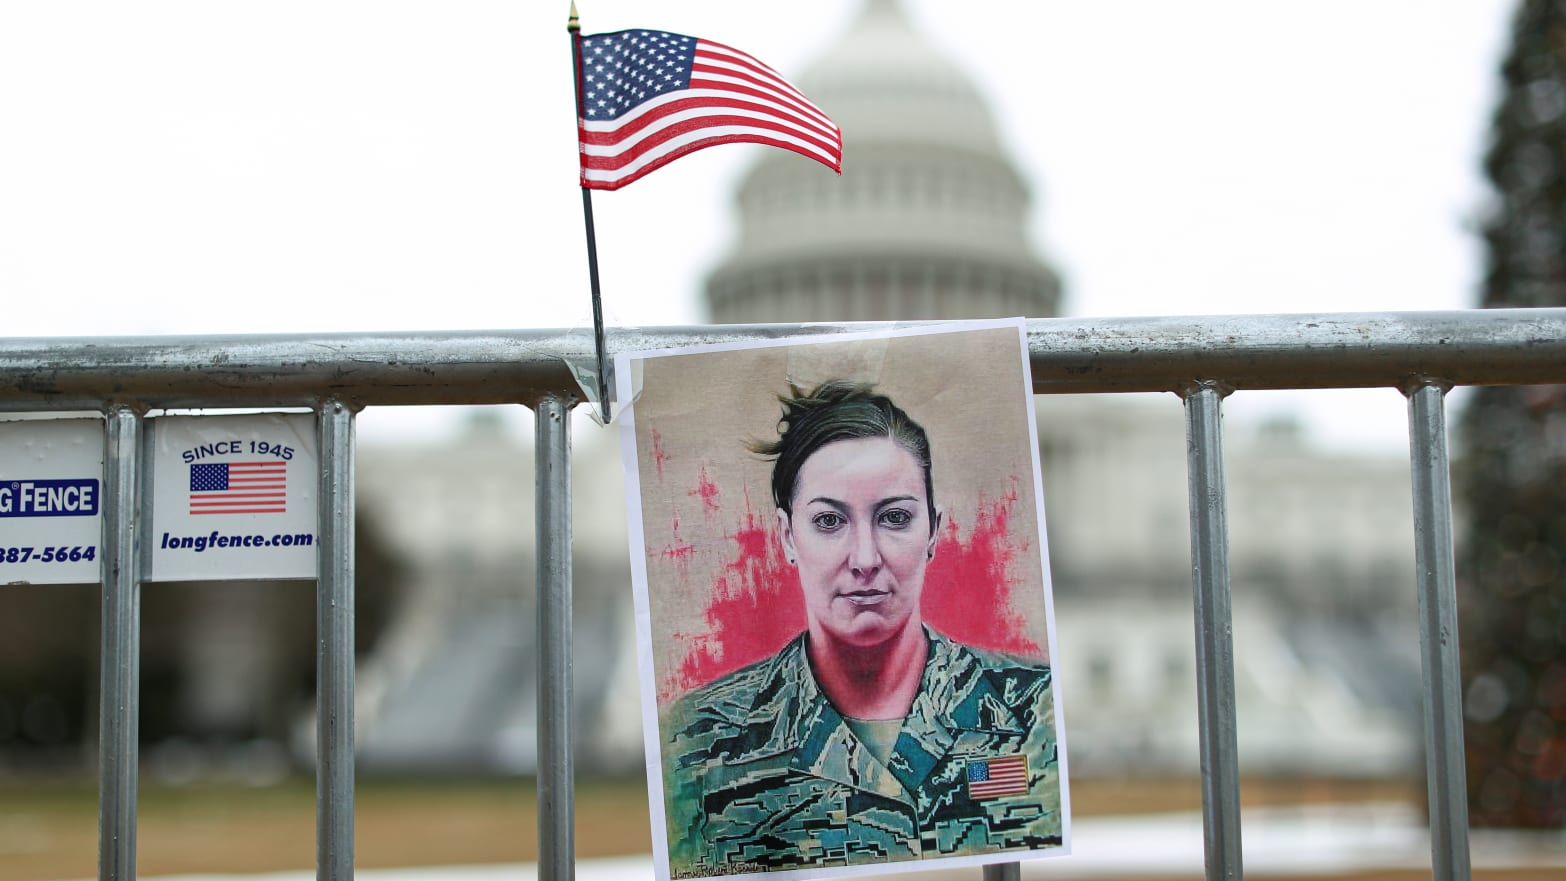 A portrait of Ashli Babbitt who was shot dead during the January 6, 2021 attack on the U.S. Capitol, hangs on a fence outside the Capitol, in Washington, D.C.